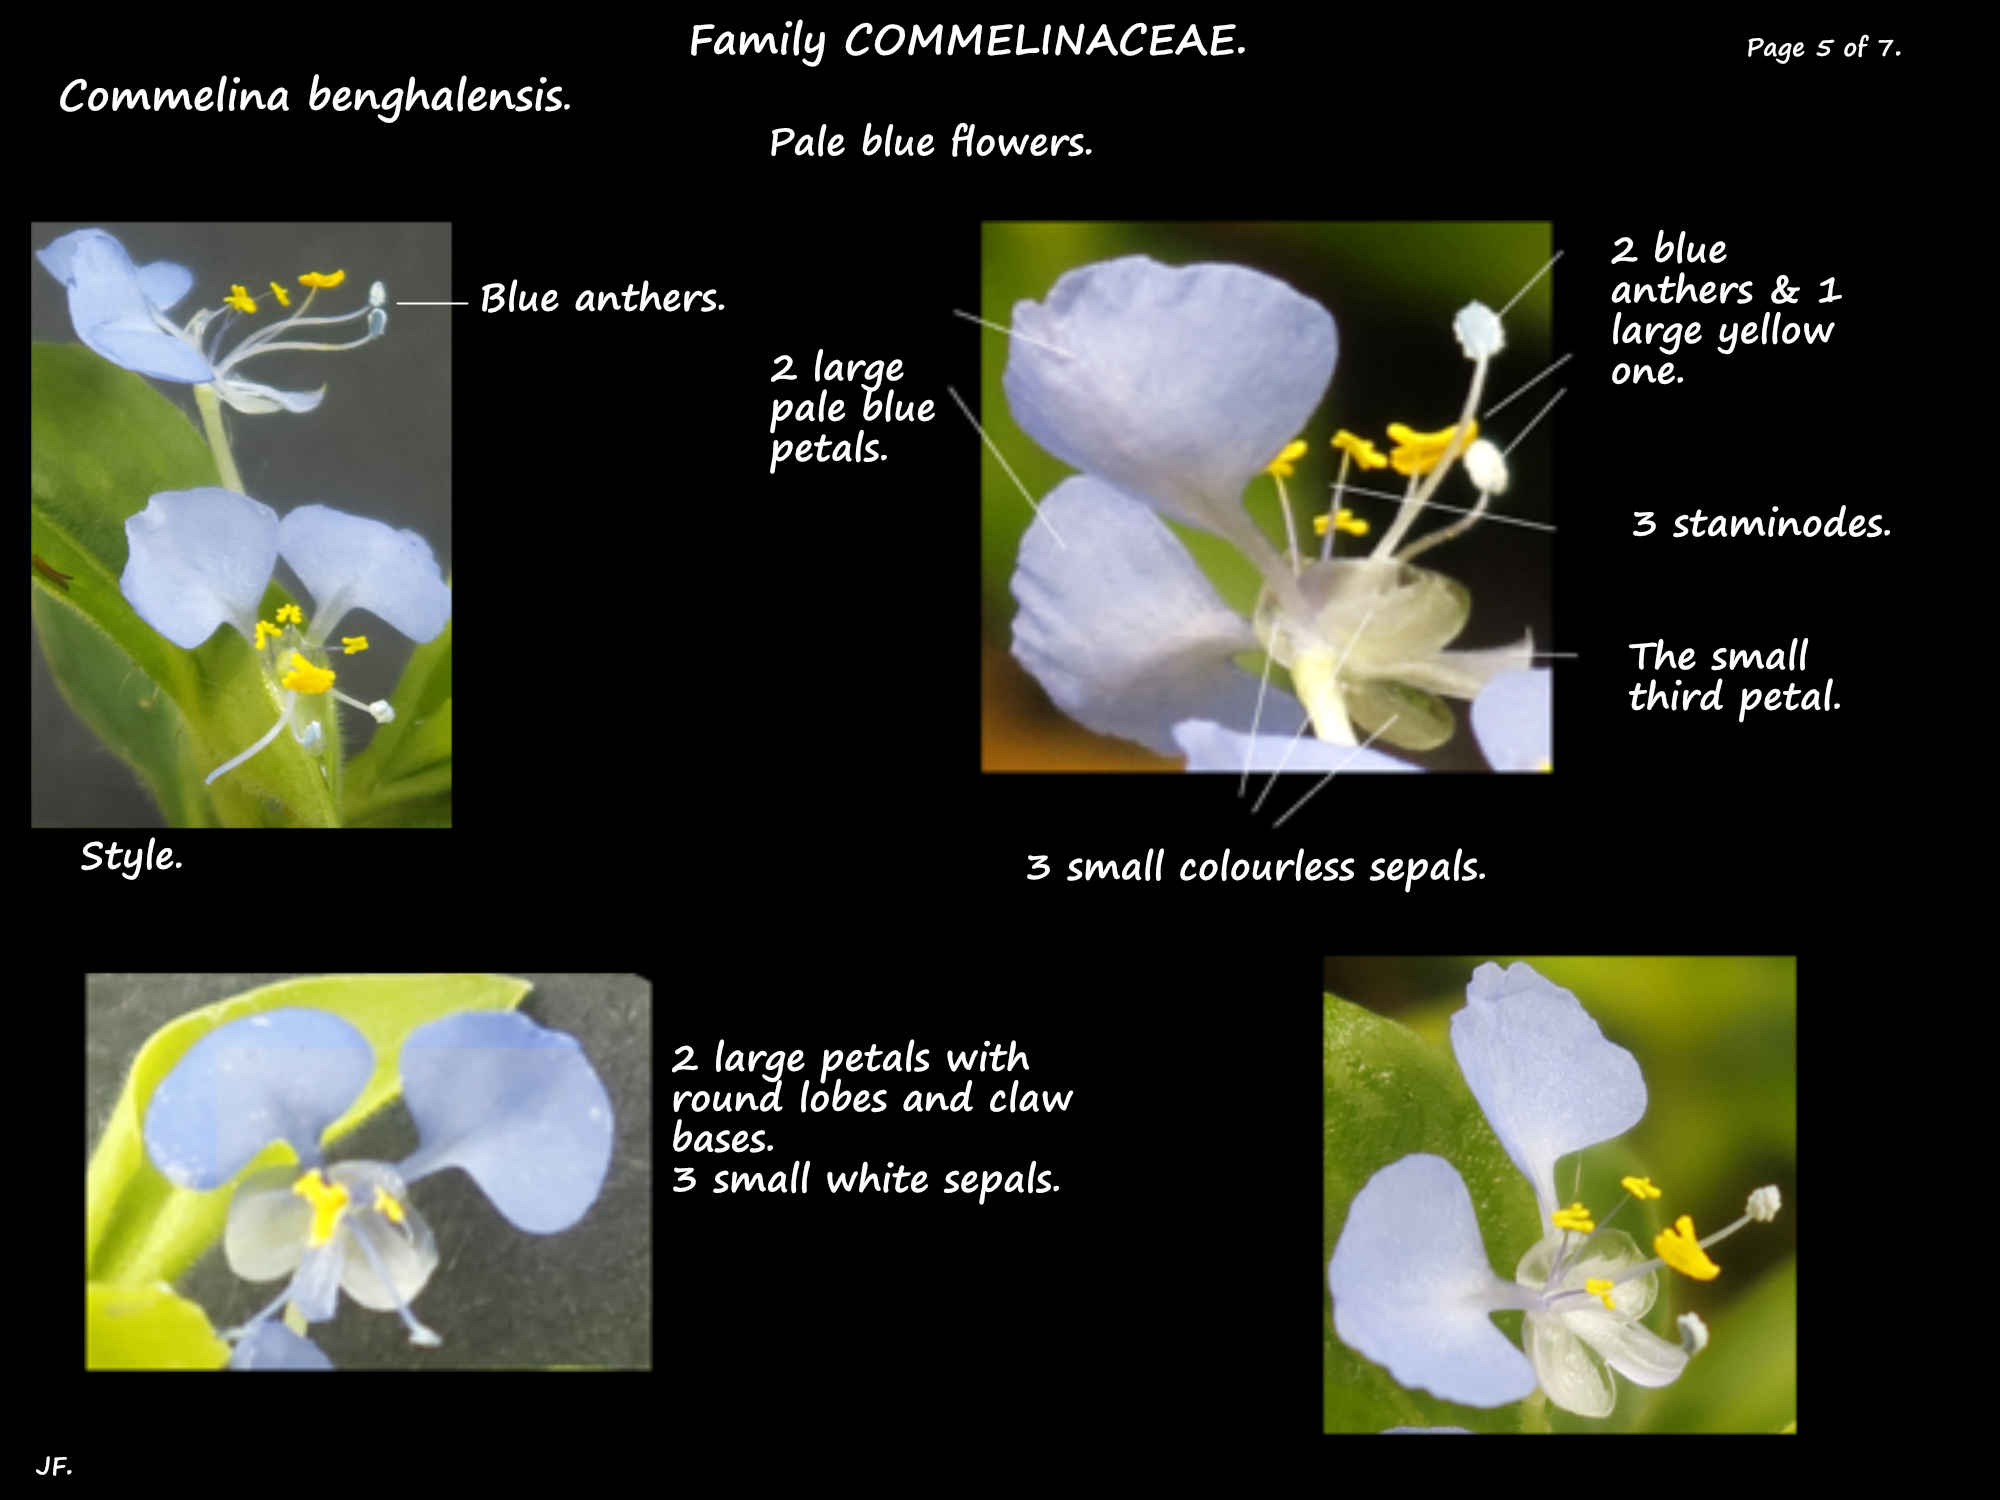 5 Pale blue Commelina benghalensis flowers